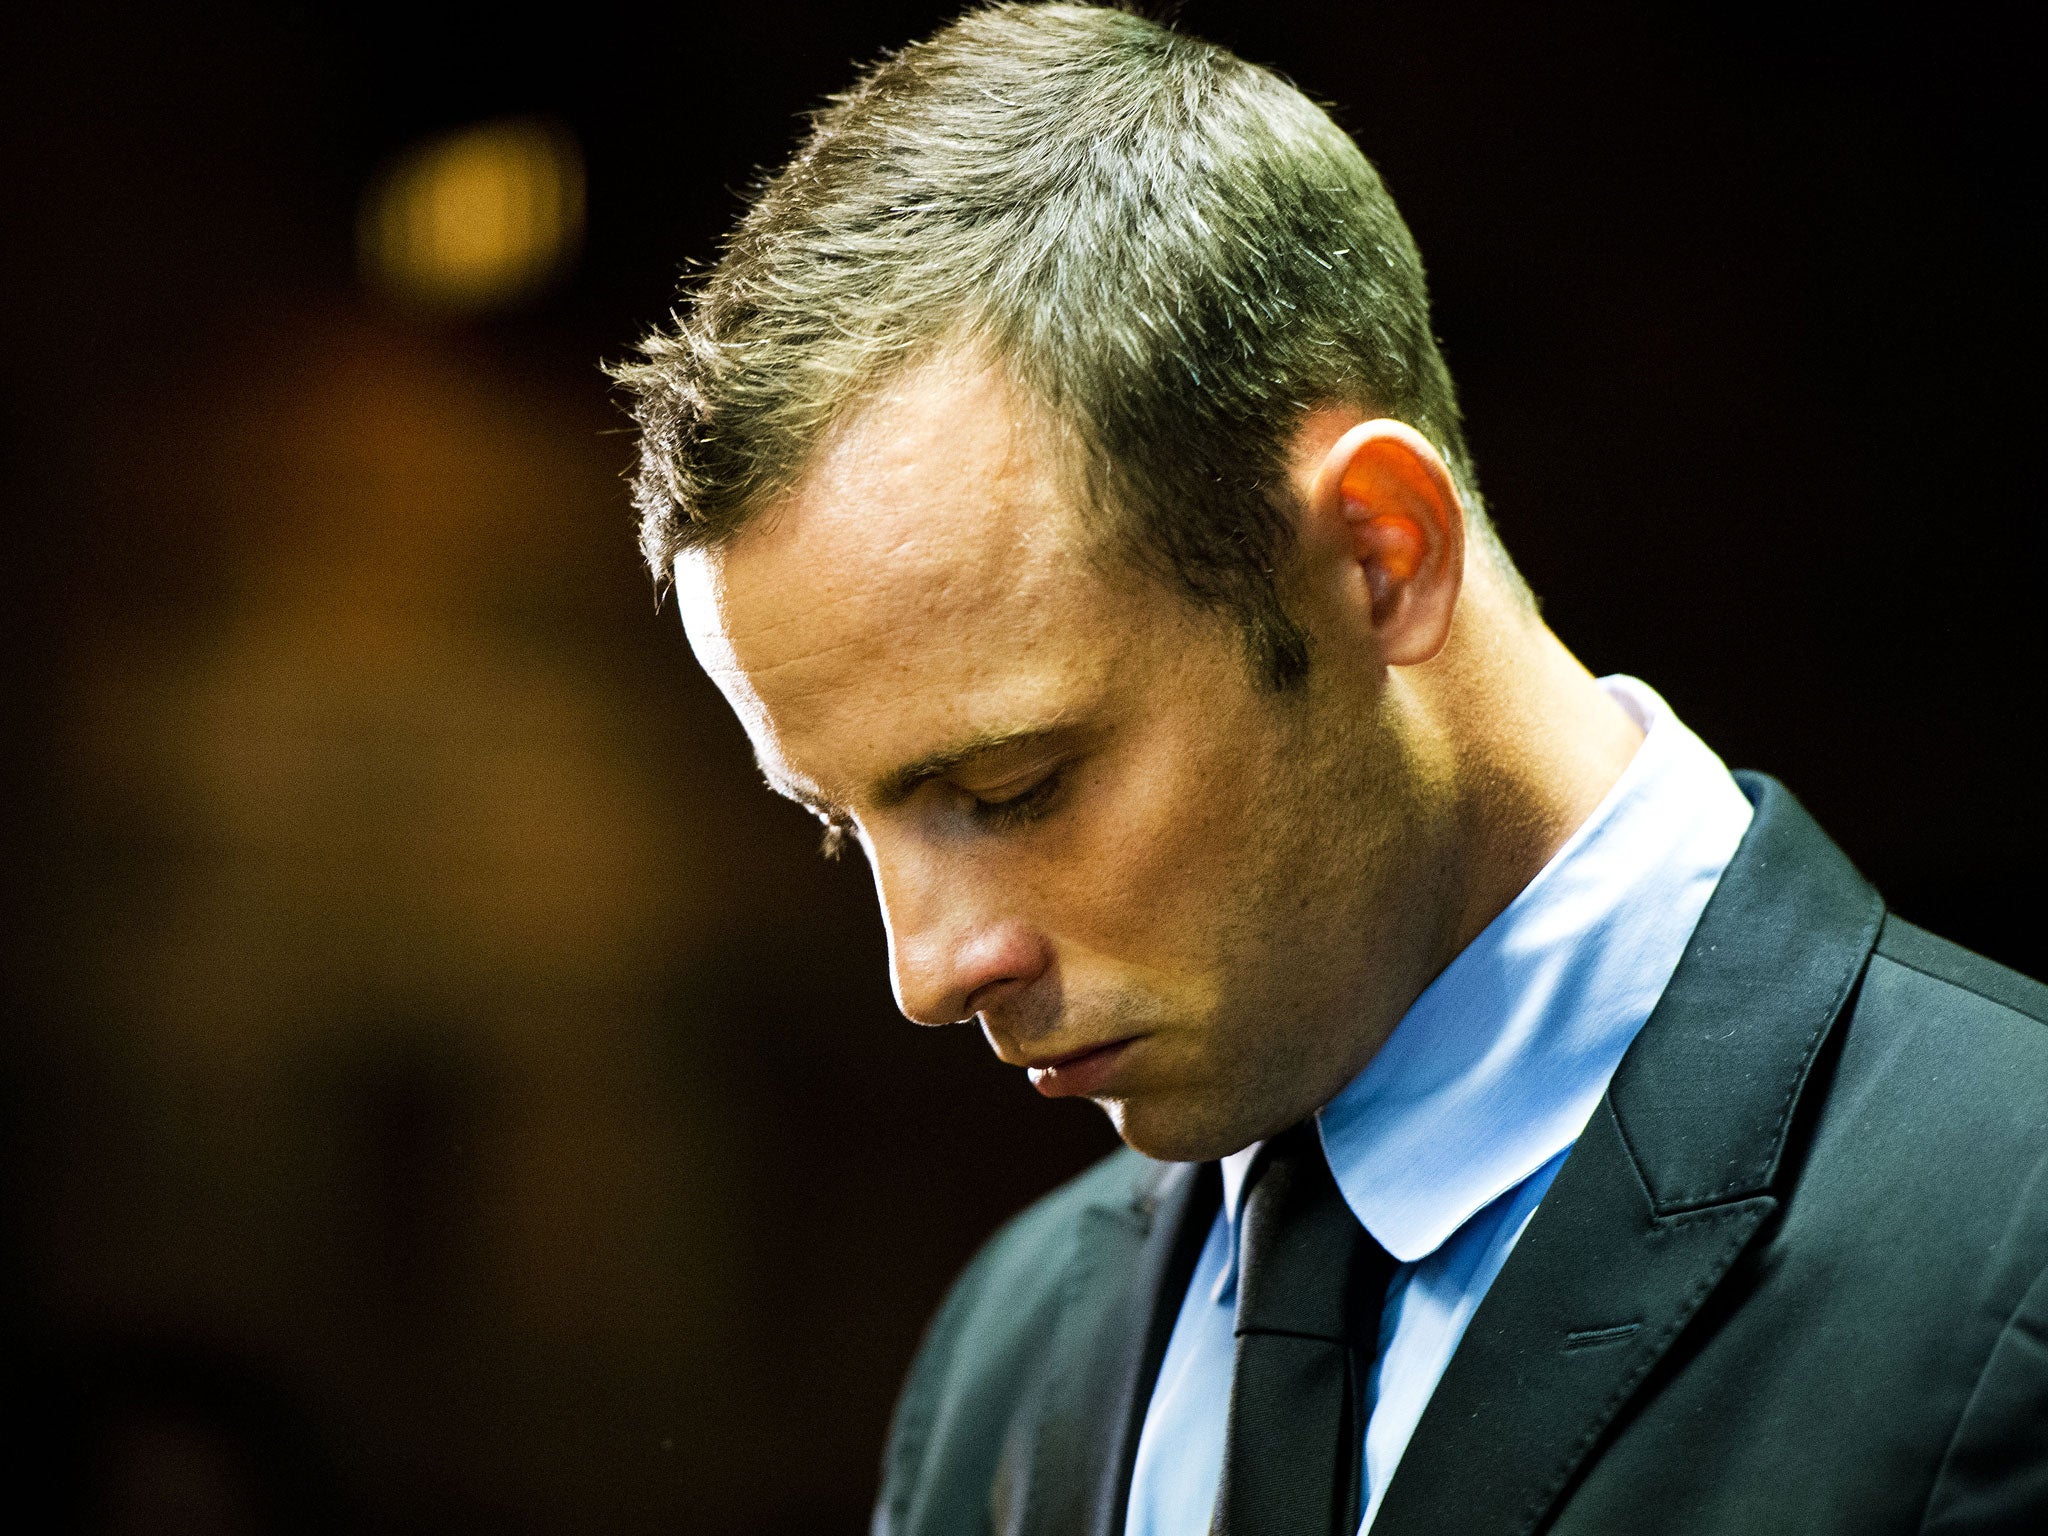 Oscar Pistorius appears for his bail hearing in the Pretoria Magistrate Court